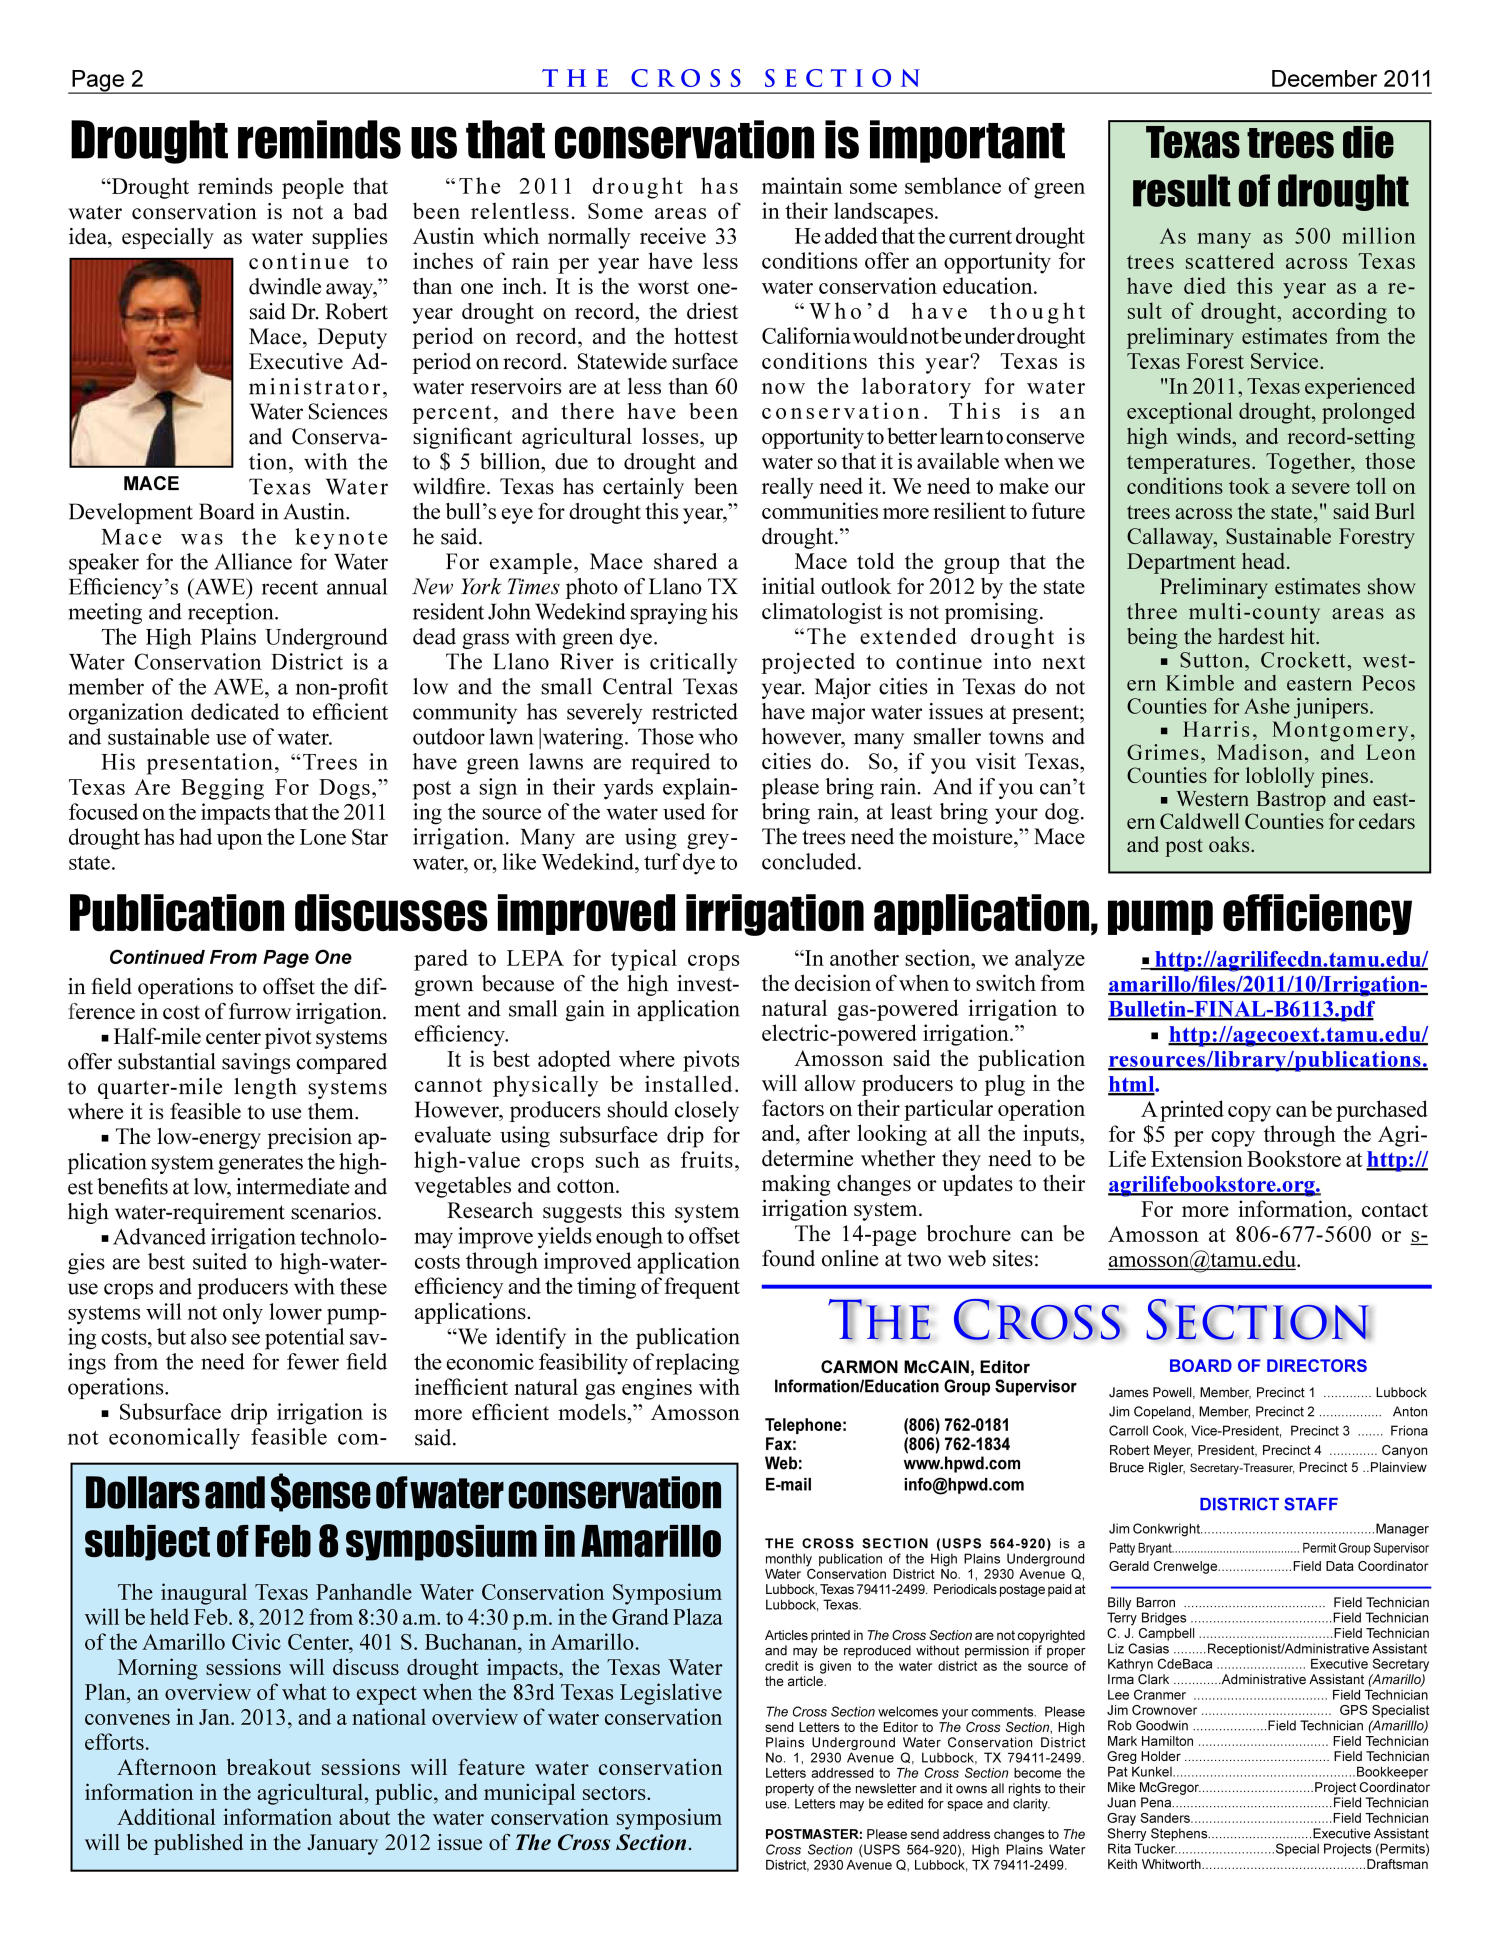 The Cross Section, Volume 57, Number 12, December 2011
                                                
                                                    2
                                                